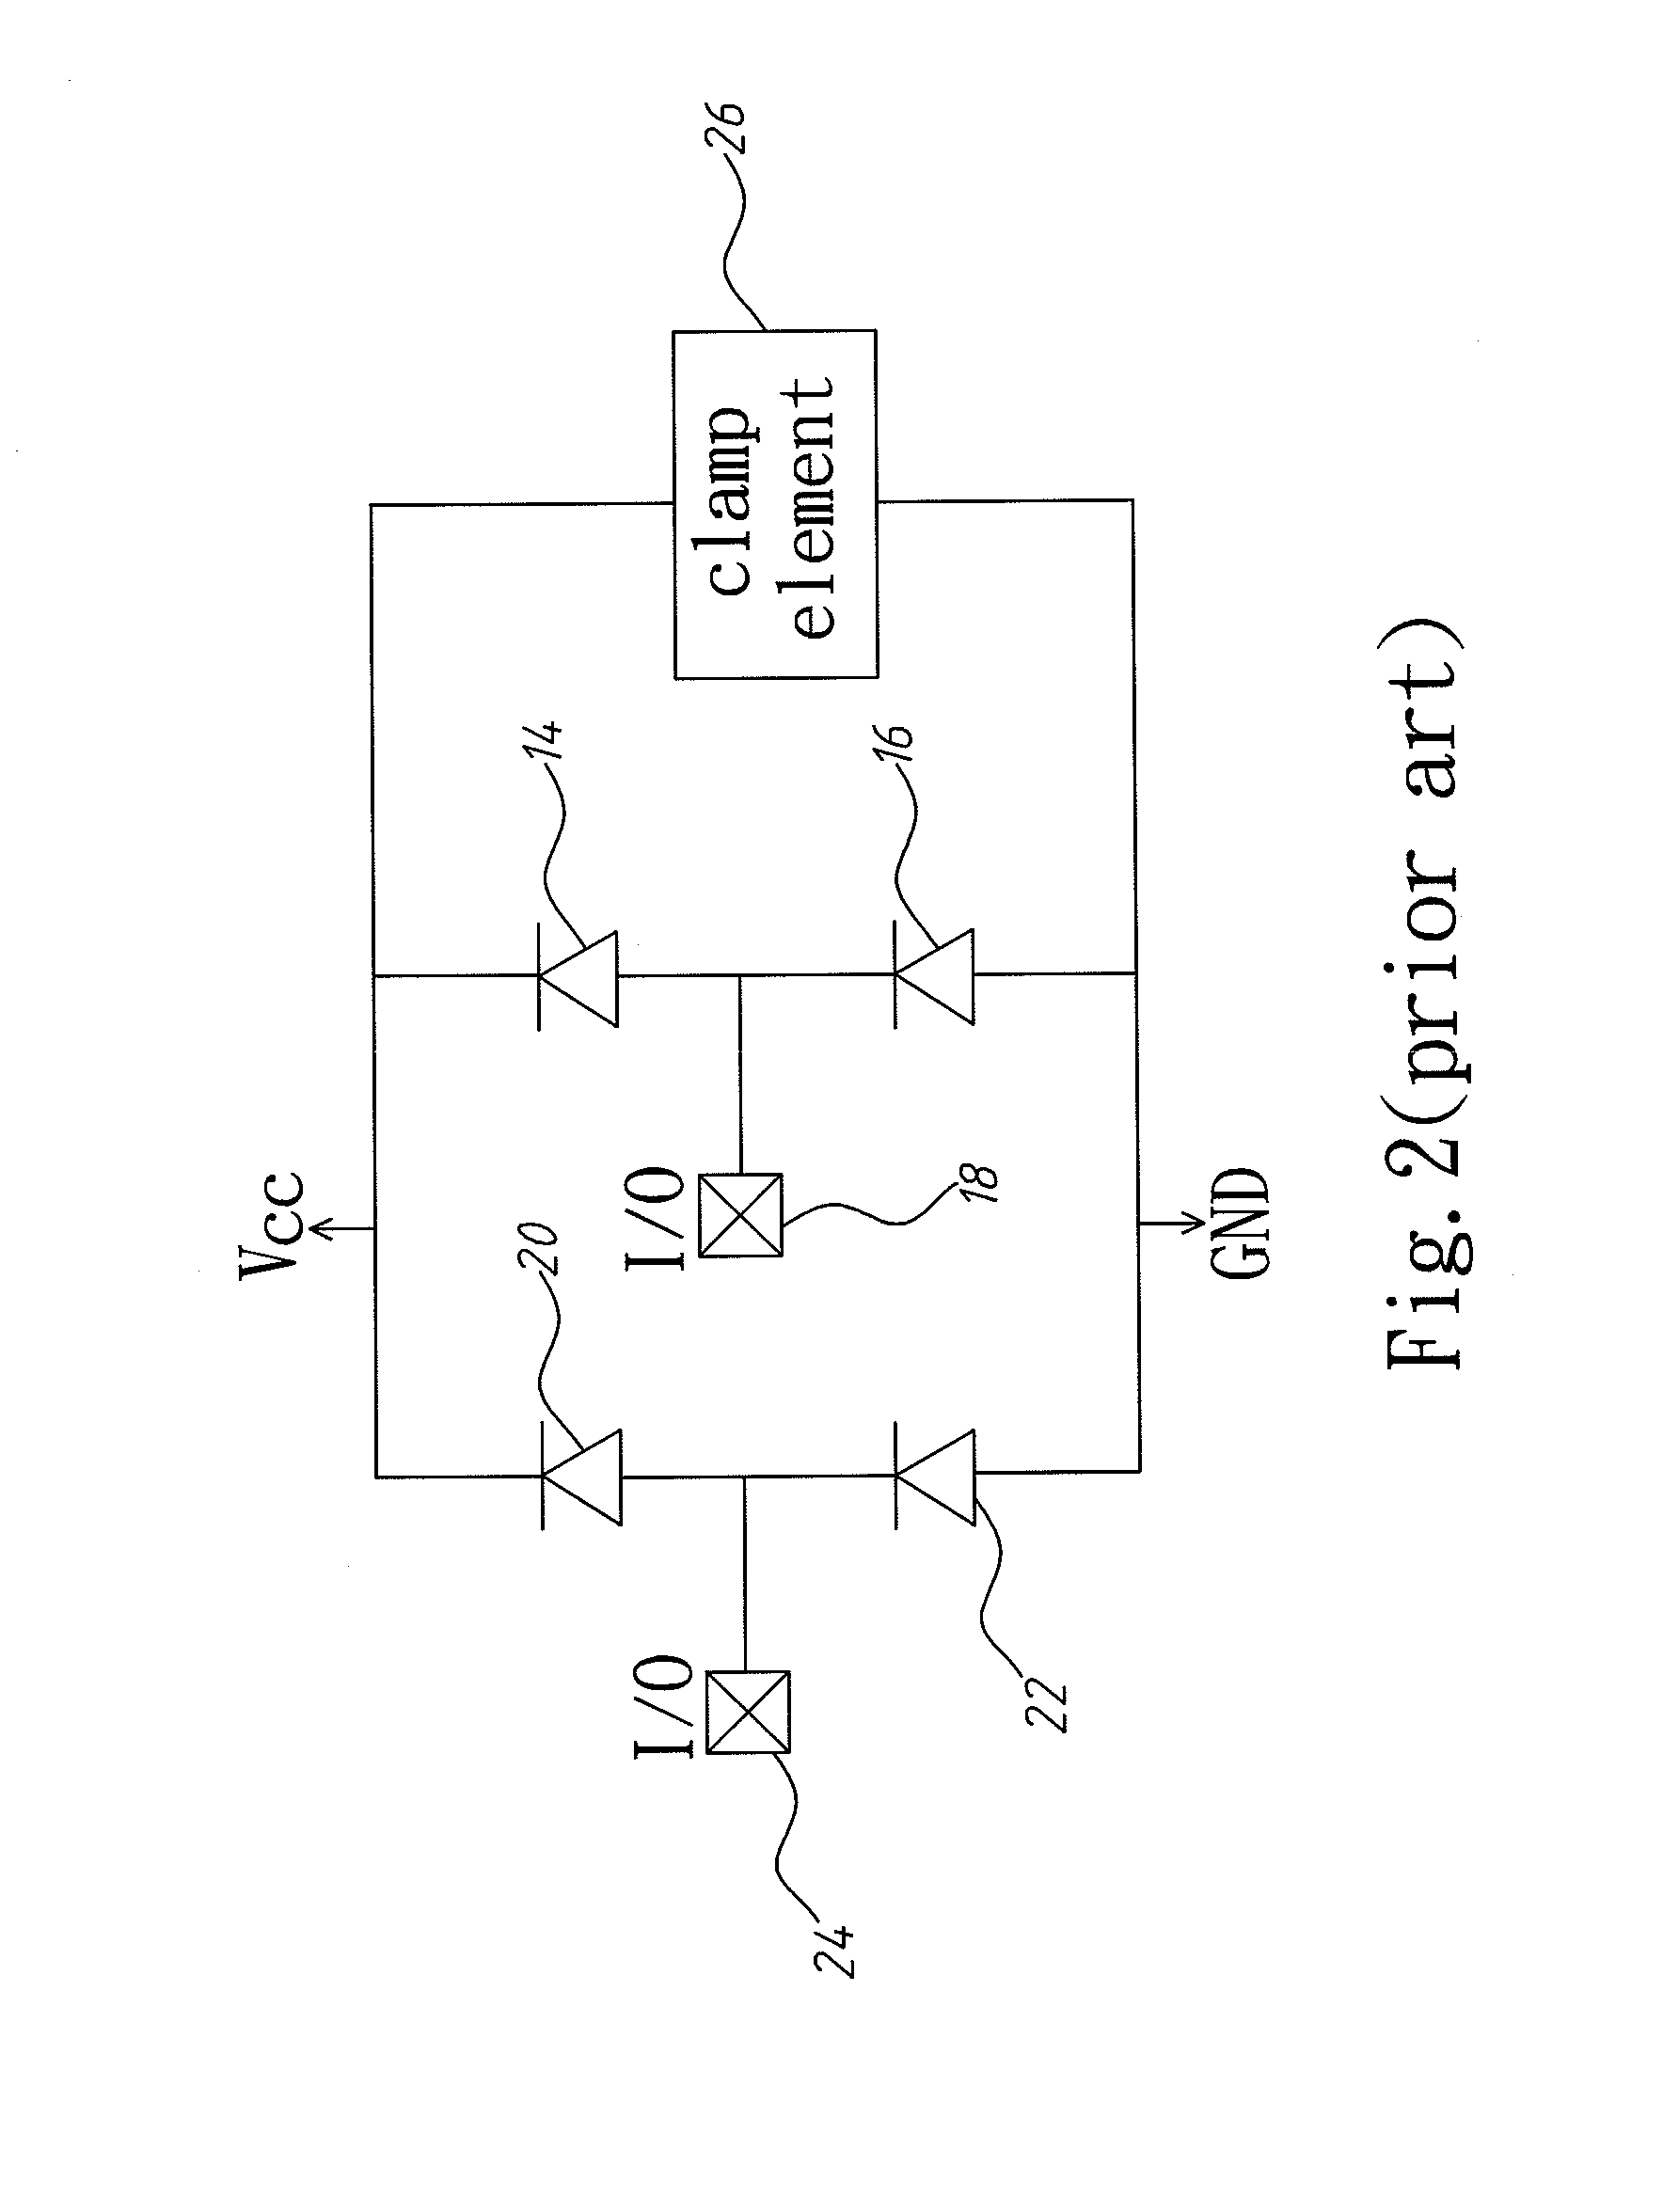 Transient voltage suppressor for multiple pin assignments